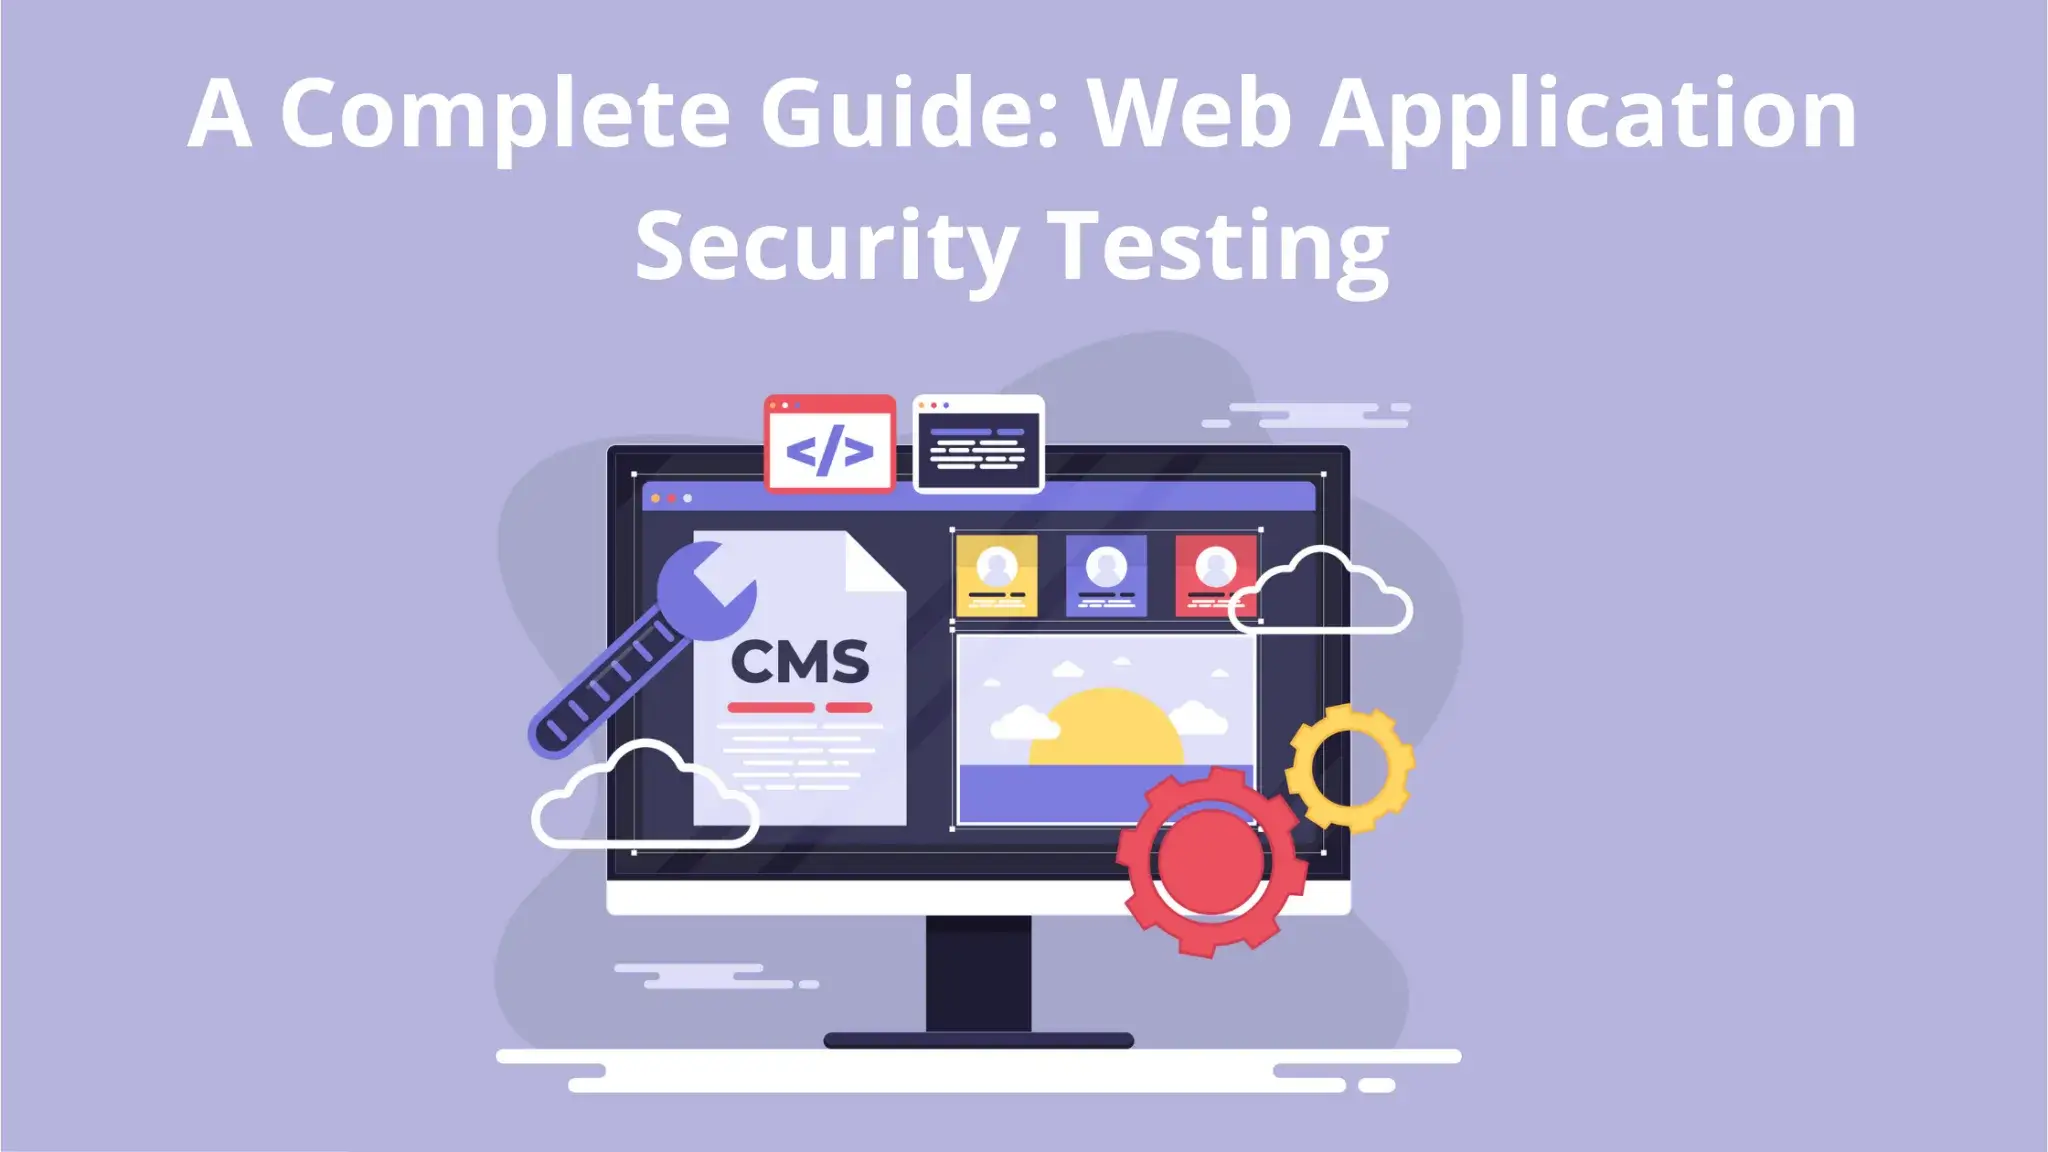 A-Complete-Guide-Web-Application-Security-Testing-2048x1152-1